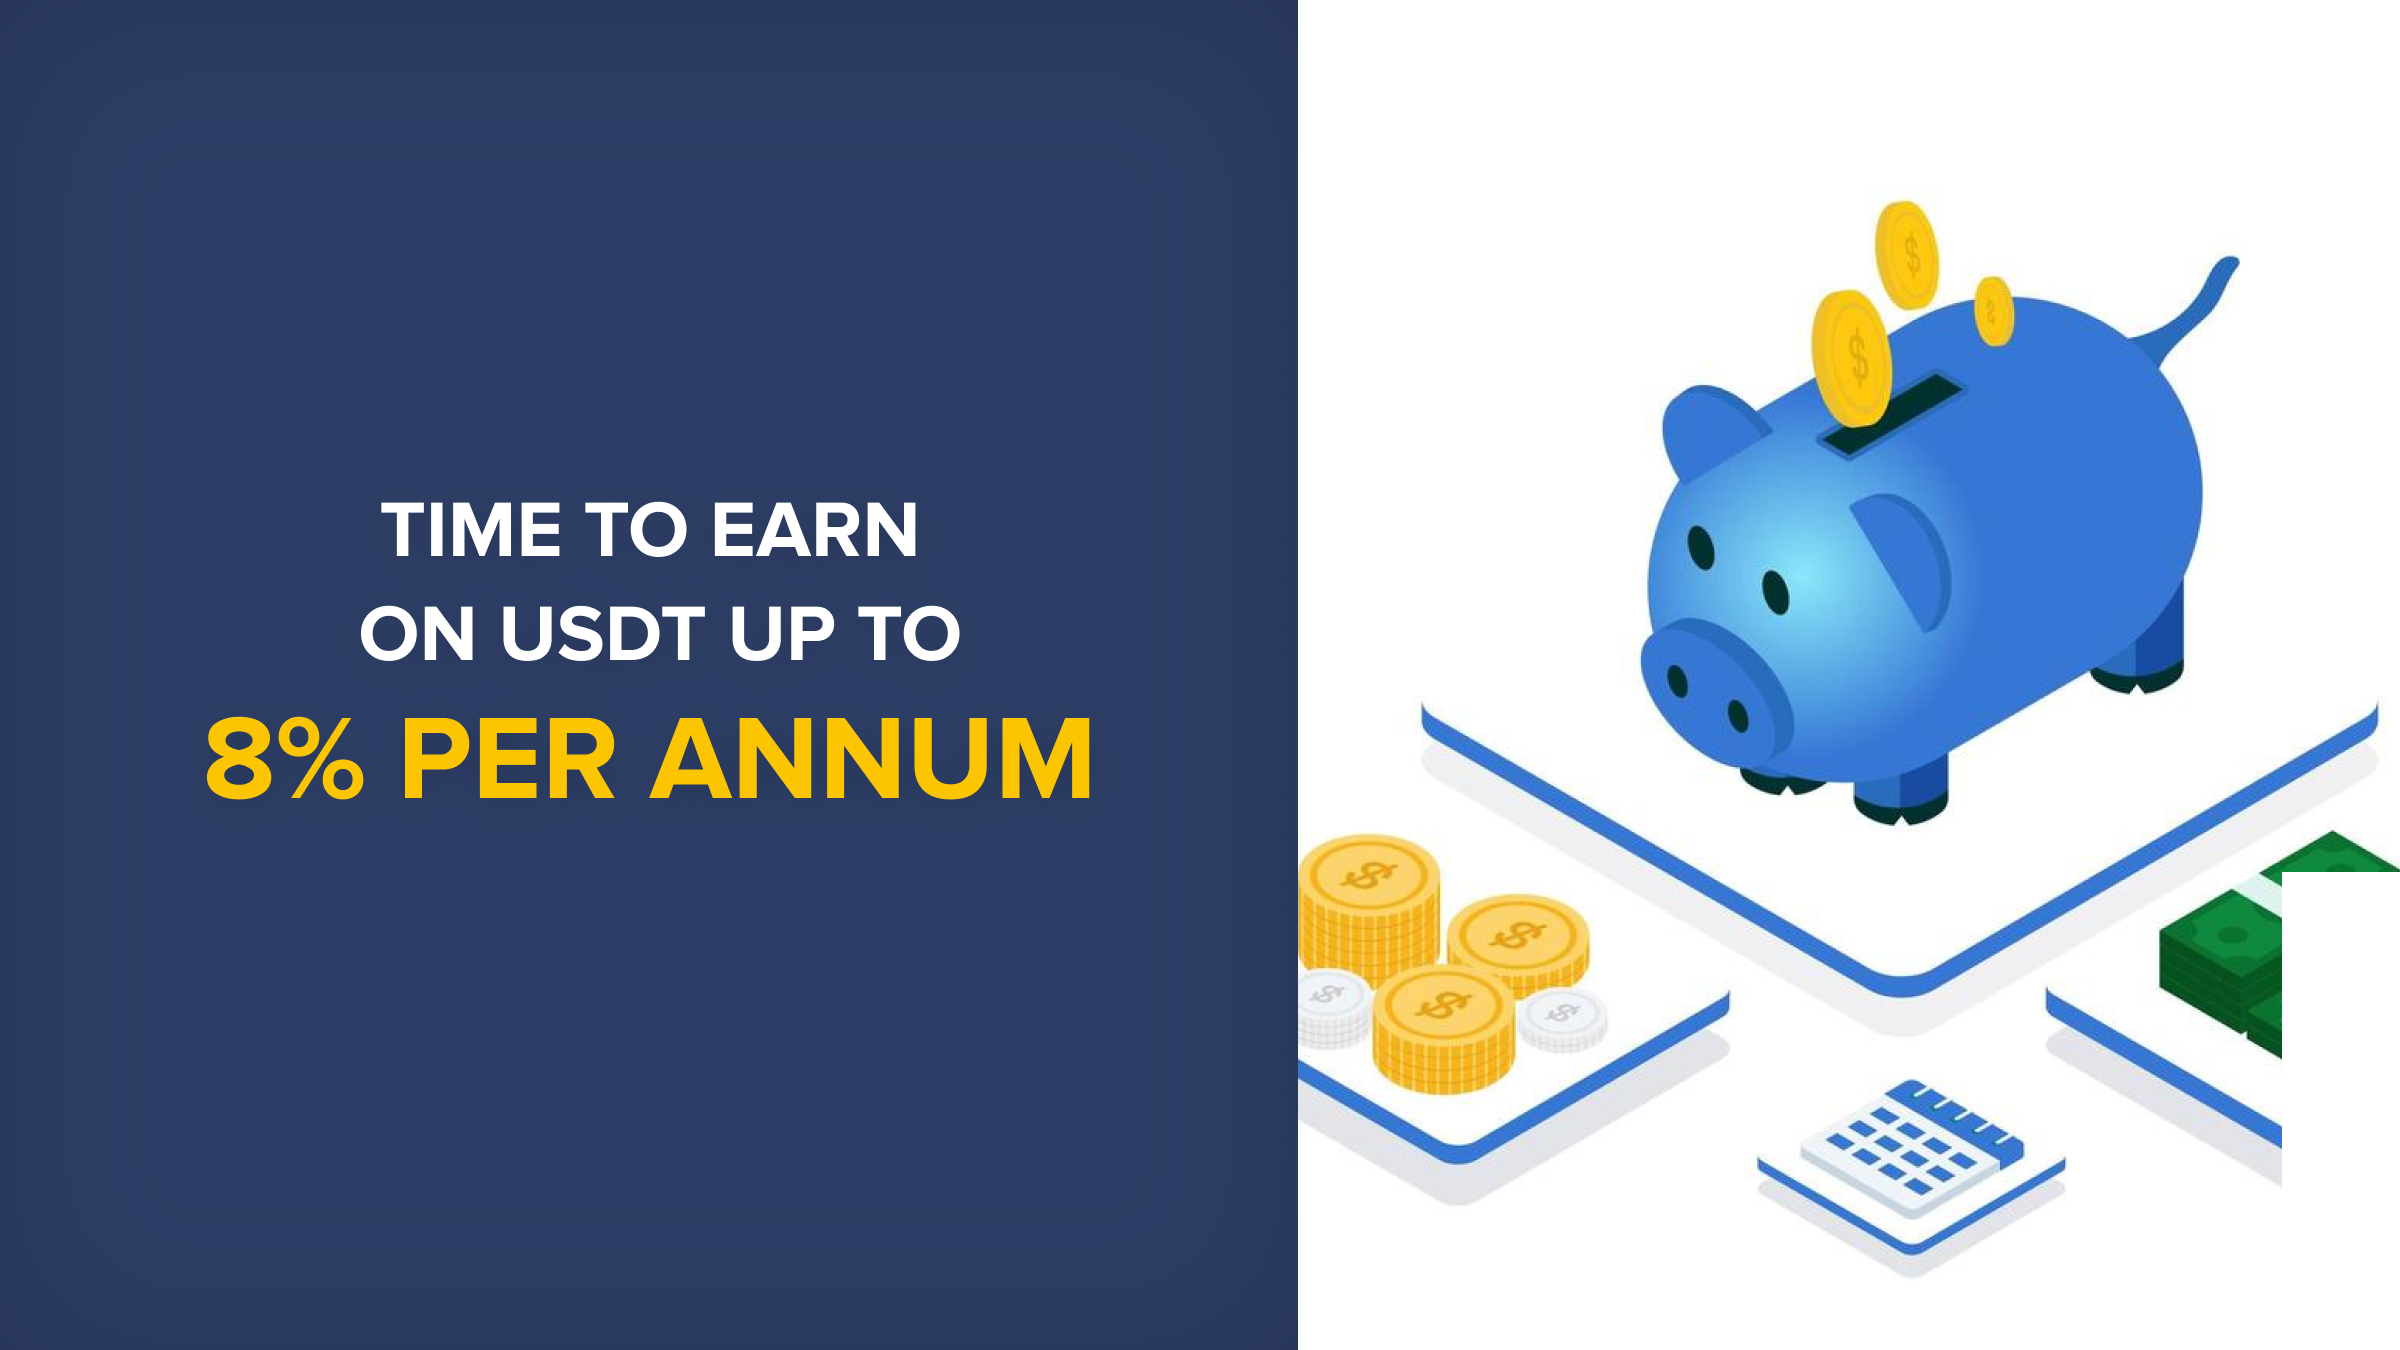 The Biterest Update: Earn up to 8% per annum on your USDT